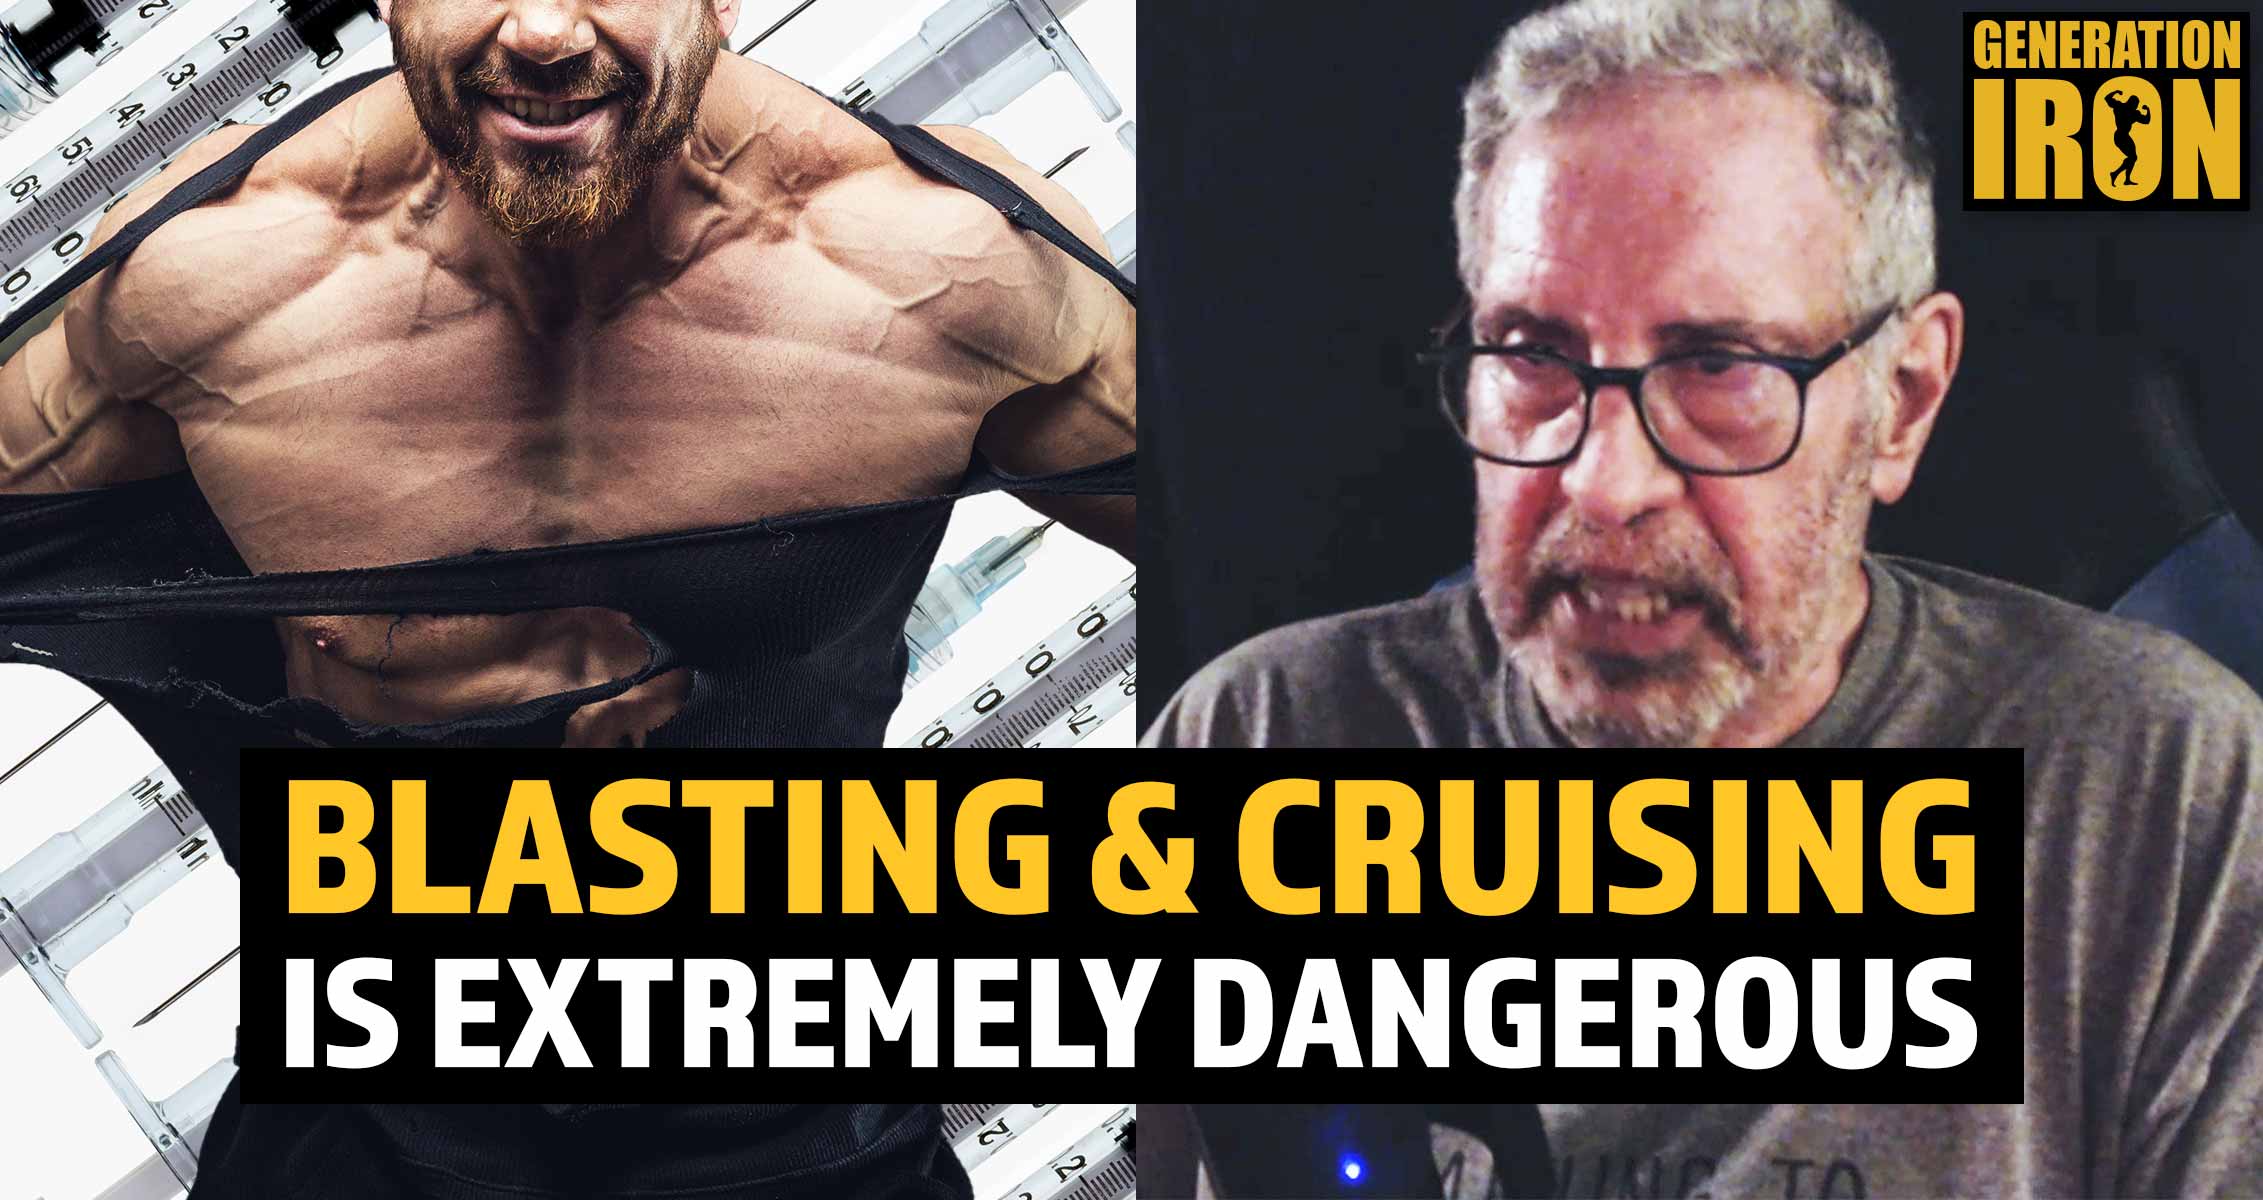 Straight Facts: The Very Real Dangers Of “Blasting And Cruising” With Steroids